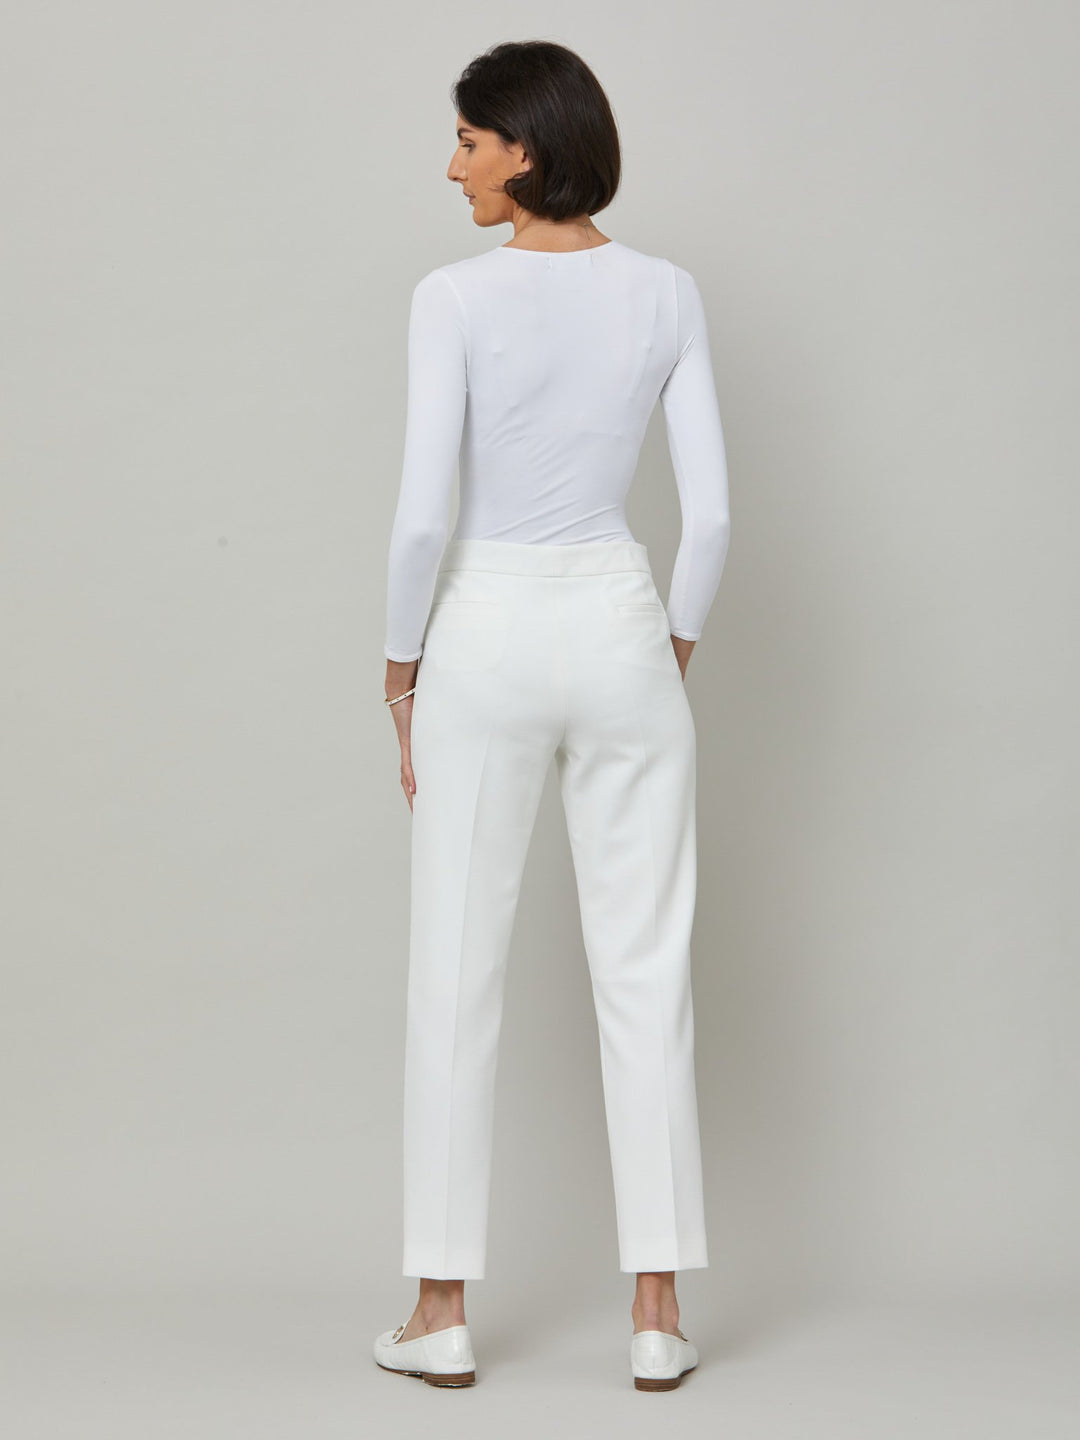 back picture of white jiill,  Investment-worthy, neat narrow-leg trouser with a hint of stretch. A wardrobe staple and HMcA classic, here in optical white.